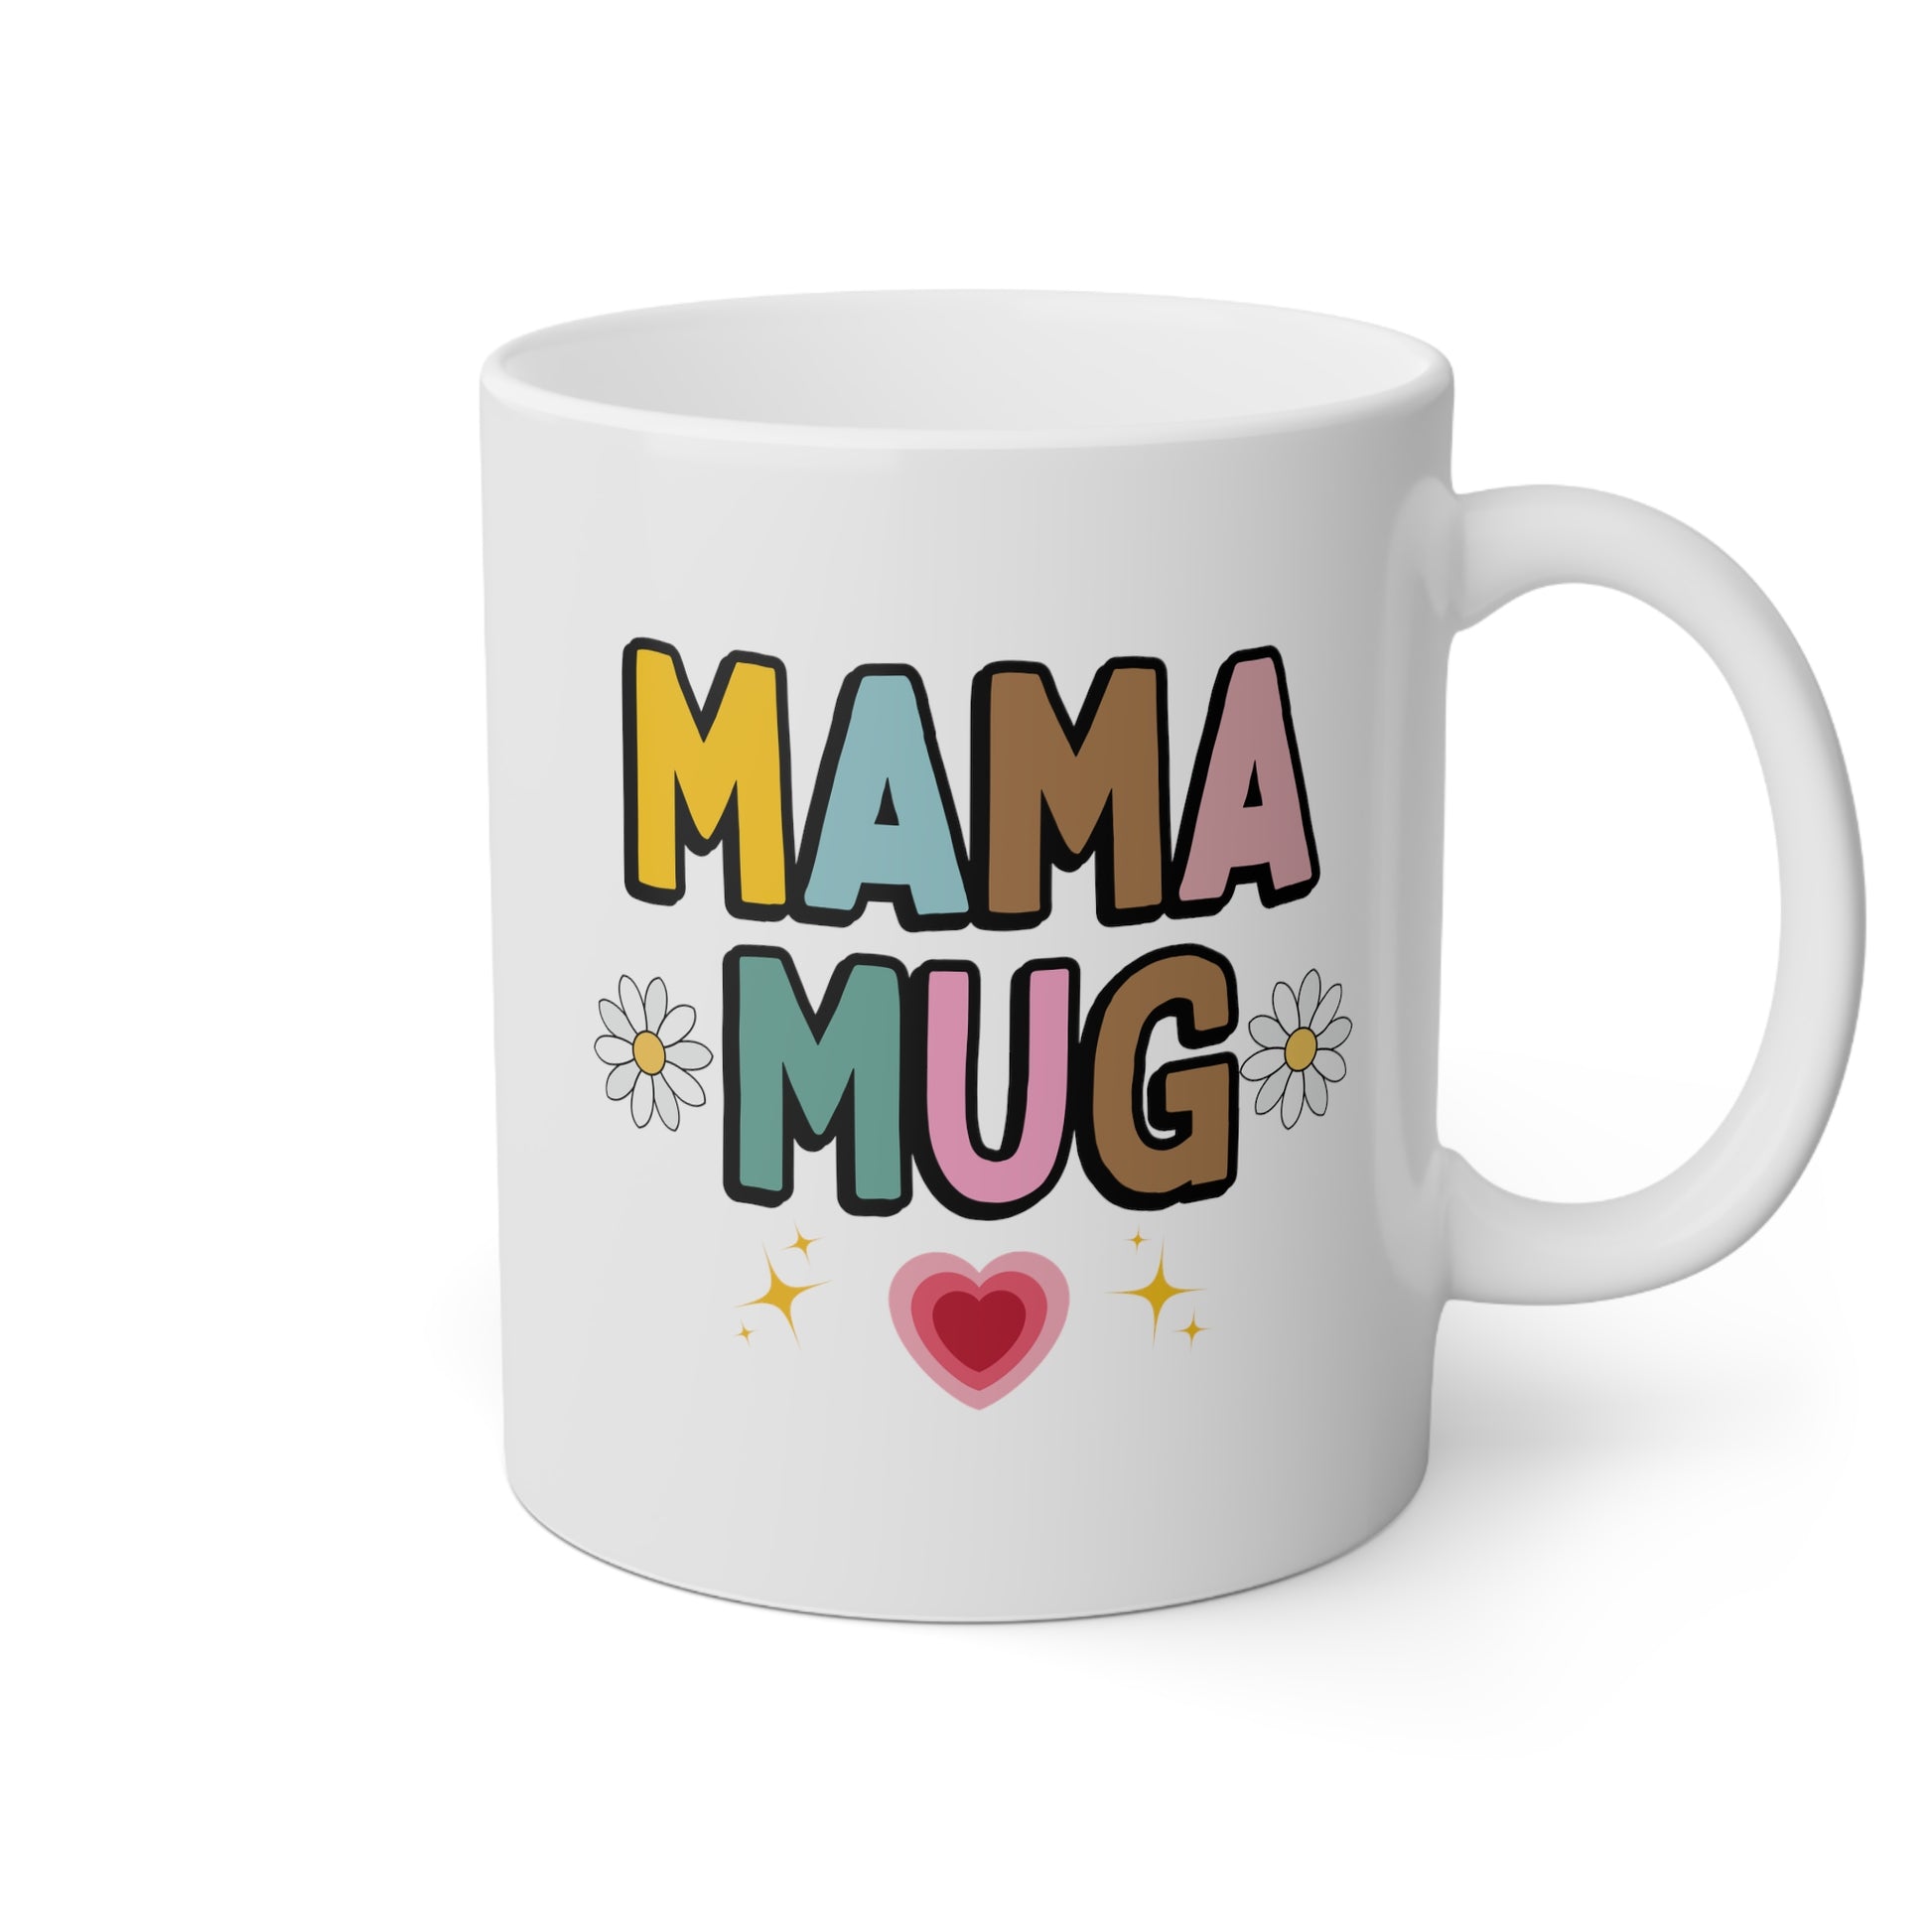 Mama Mug 11oz white funny large coffee mug gift for new mom mother pregnancy announcement baby shower waveywares wavey wares wavywares wavy wares